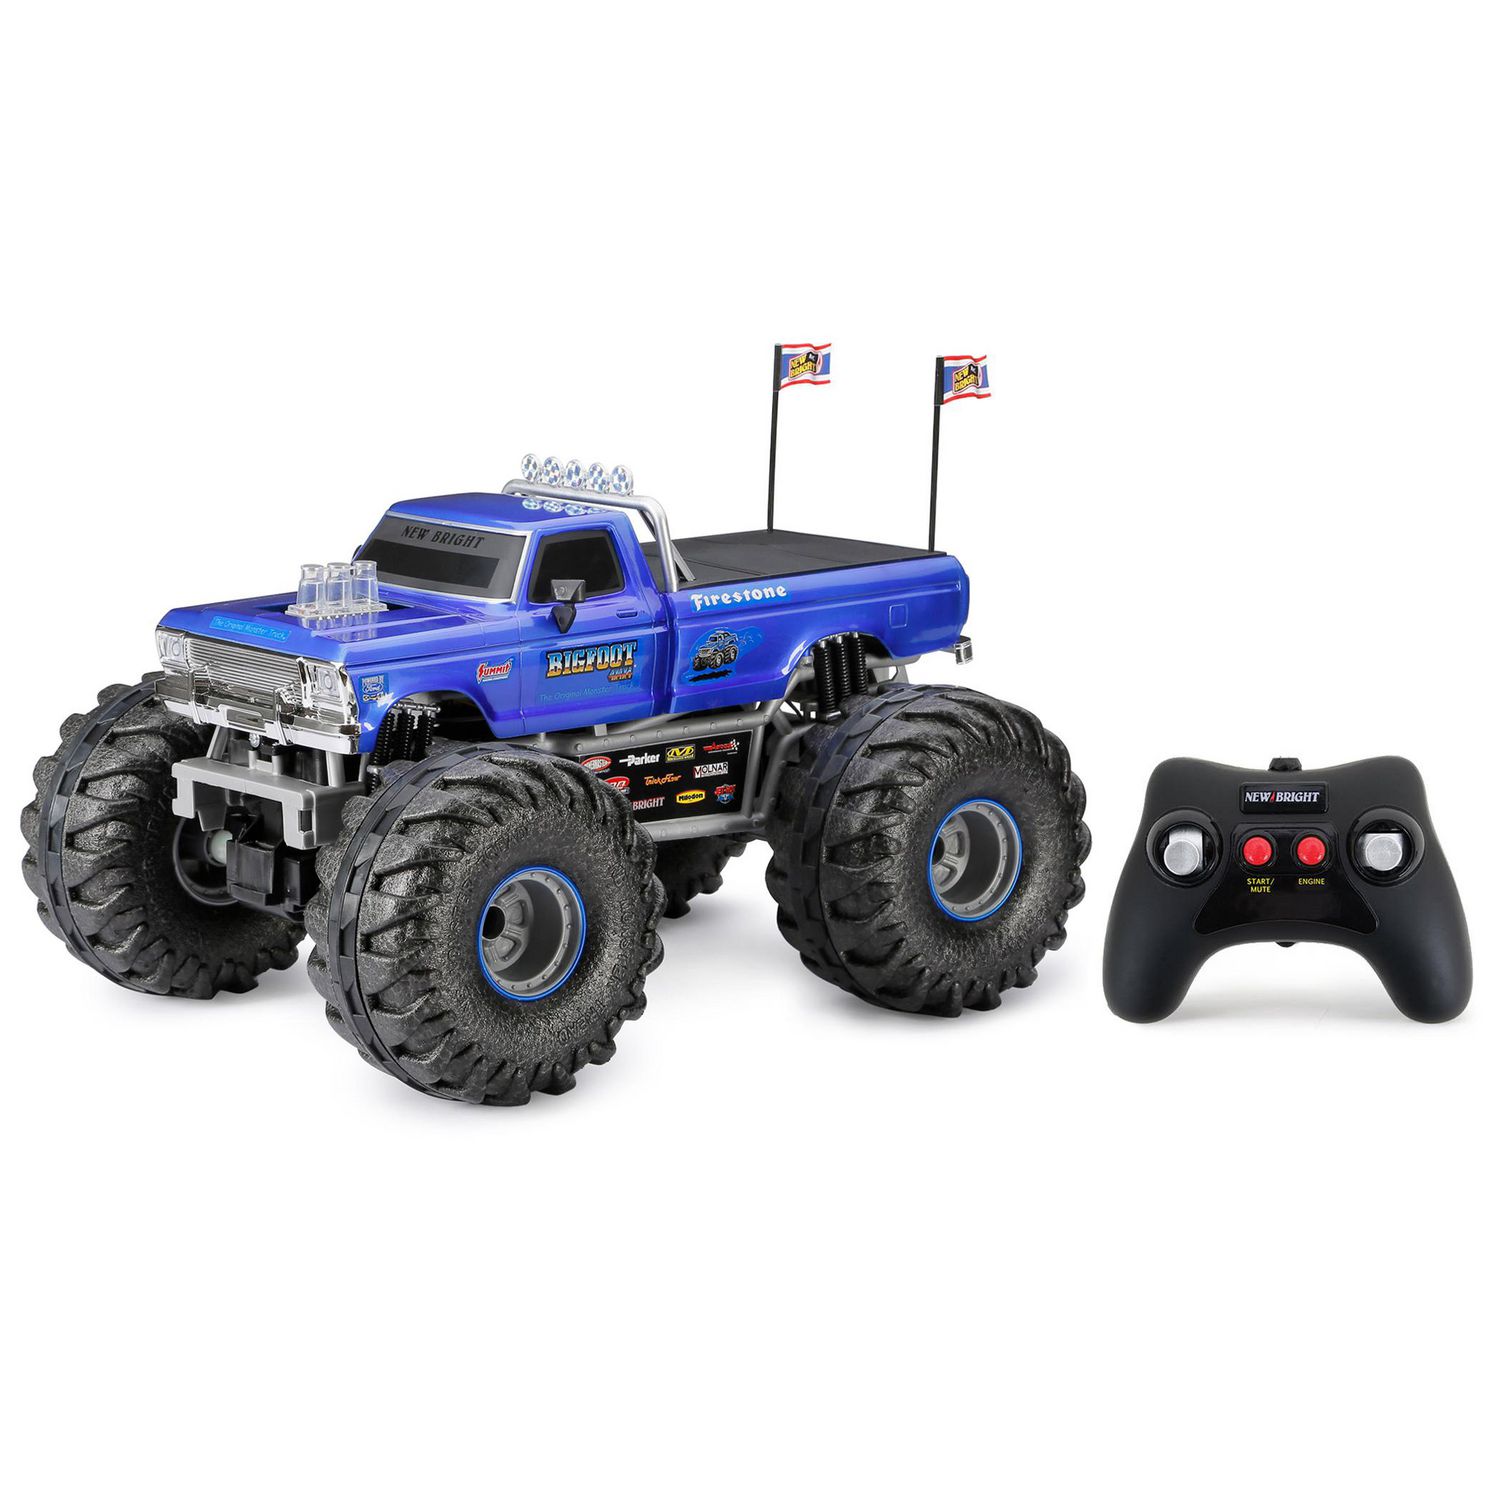 New Bright 1:10 Scale Bigfoot RC Monster Truck with Lights and Sounds 